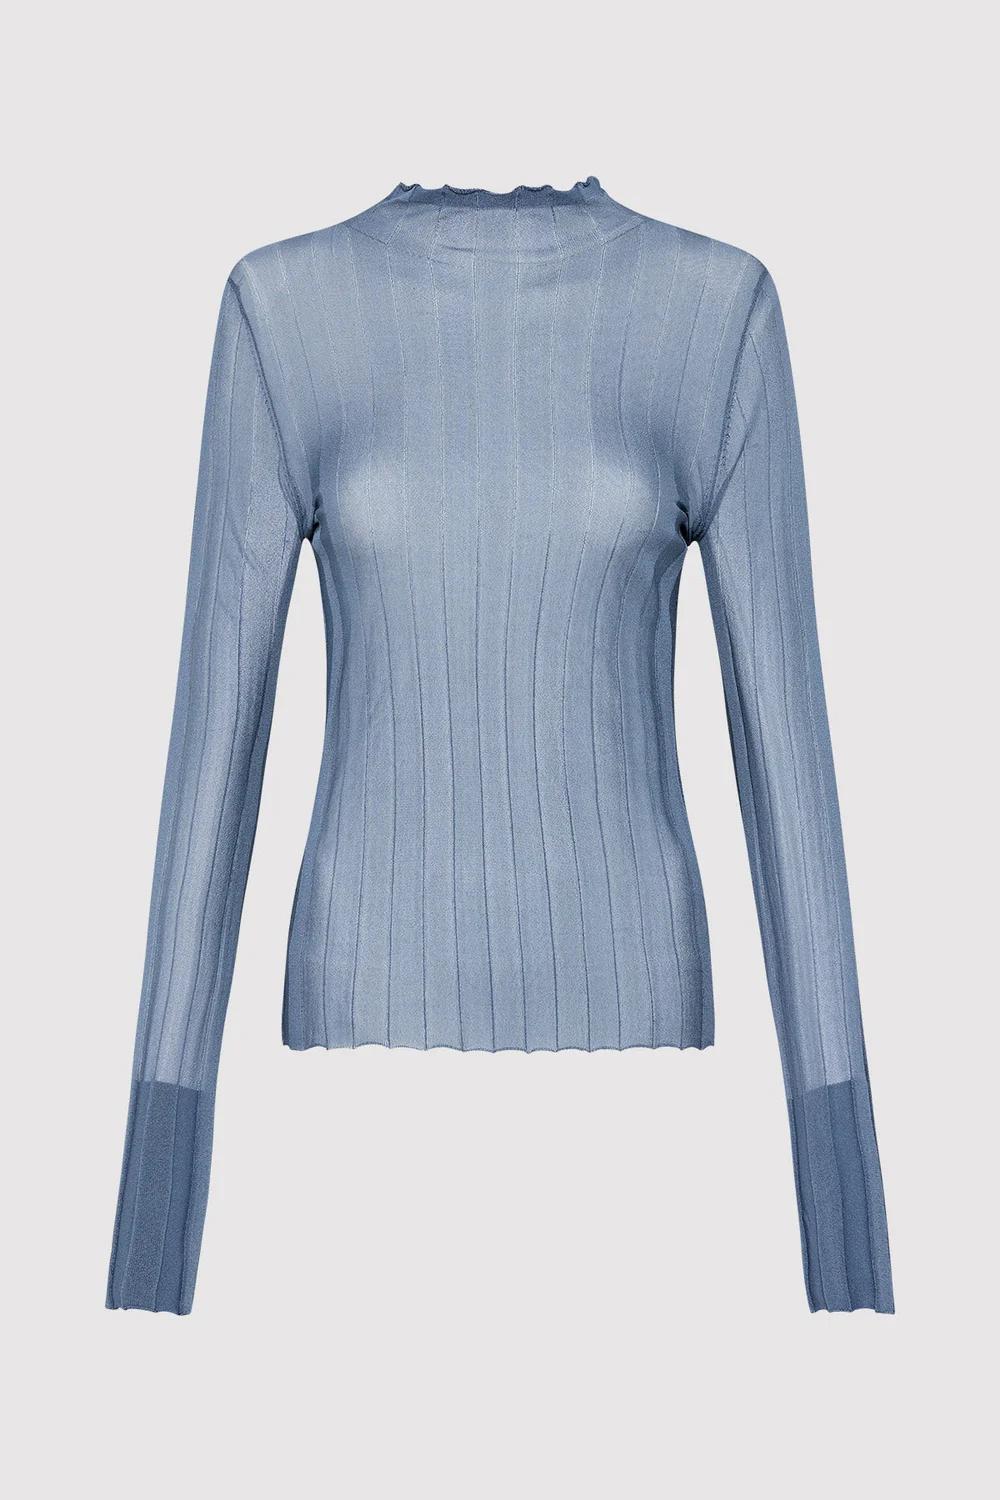 Product Image for Fine Pleat Long Sleeve Top, Steel